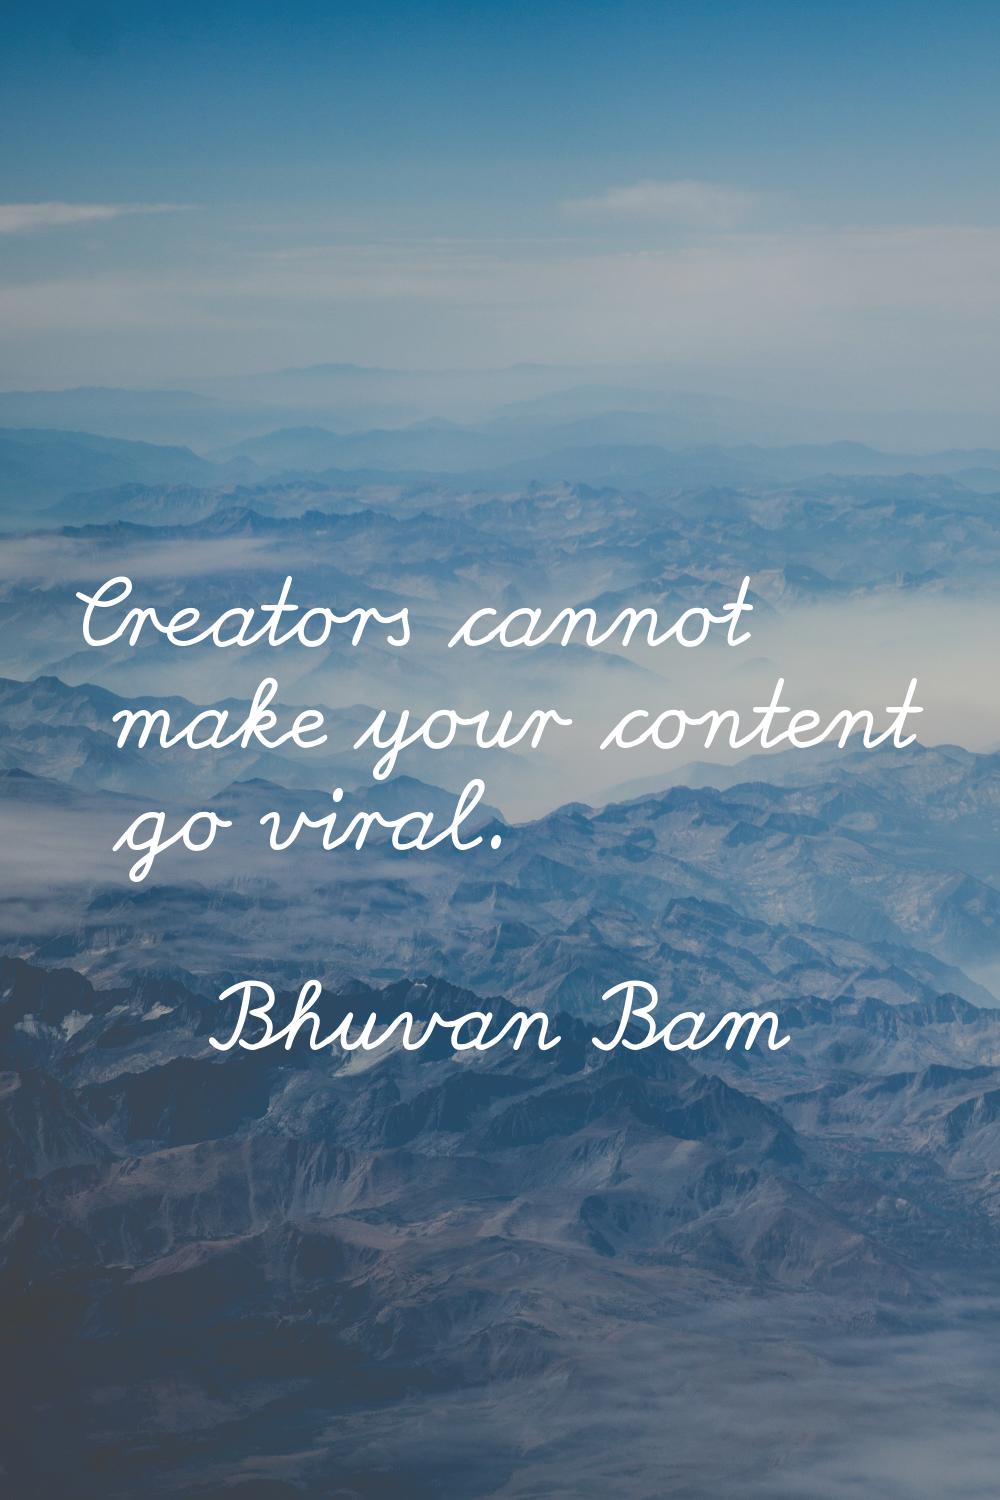 Creators cannot make your content go viral.